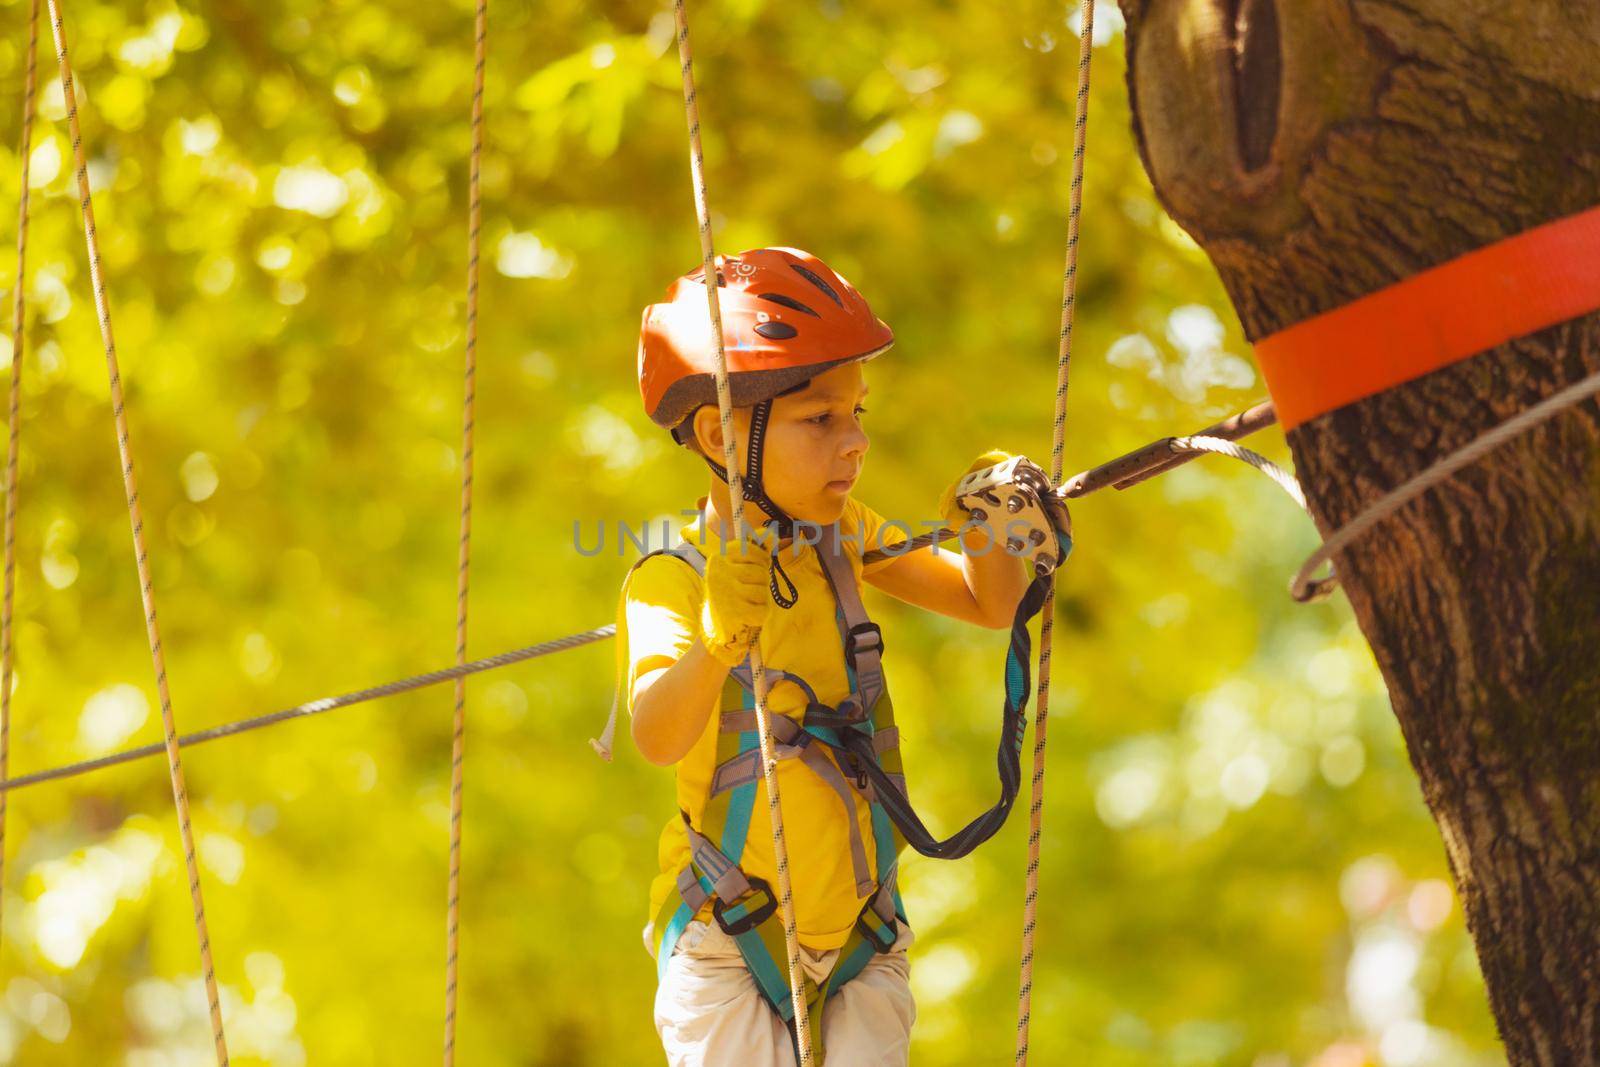 Portrait of a concentrated boy who is climbing in the rope park in summer. He is wearing a protective helmet and gloves